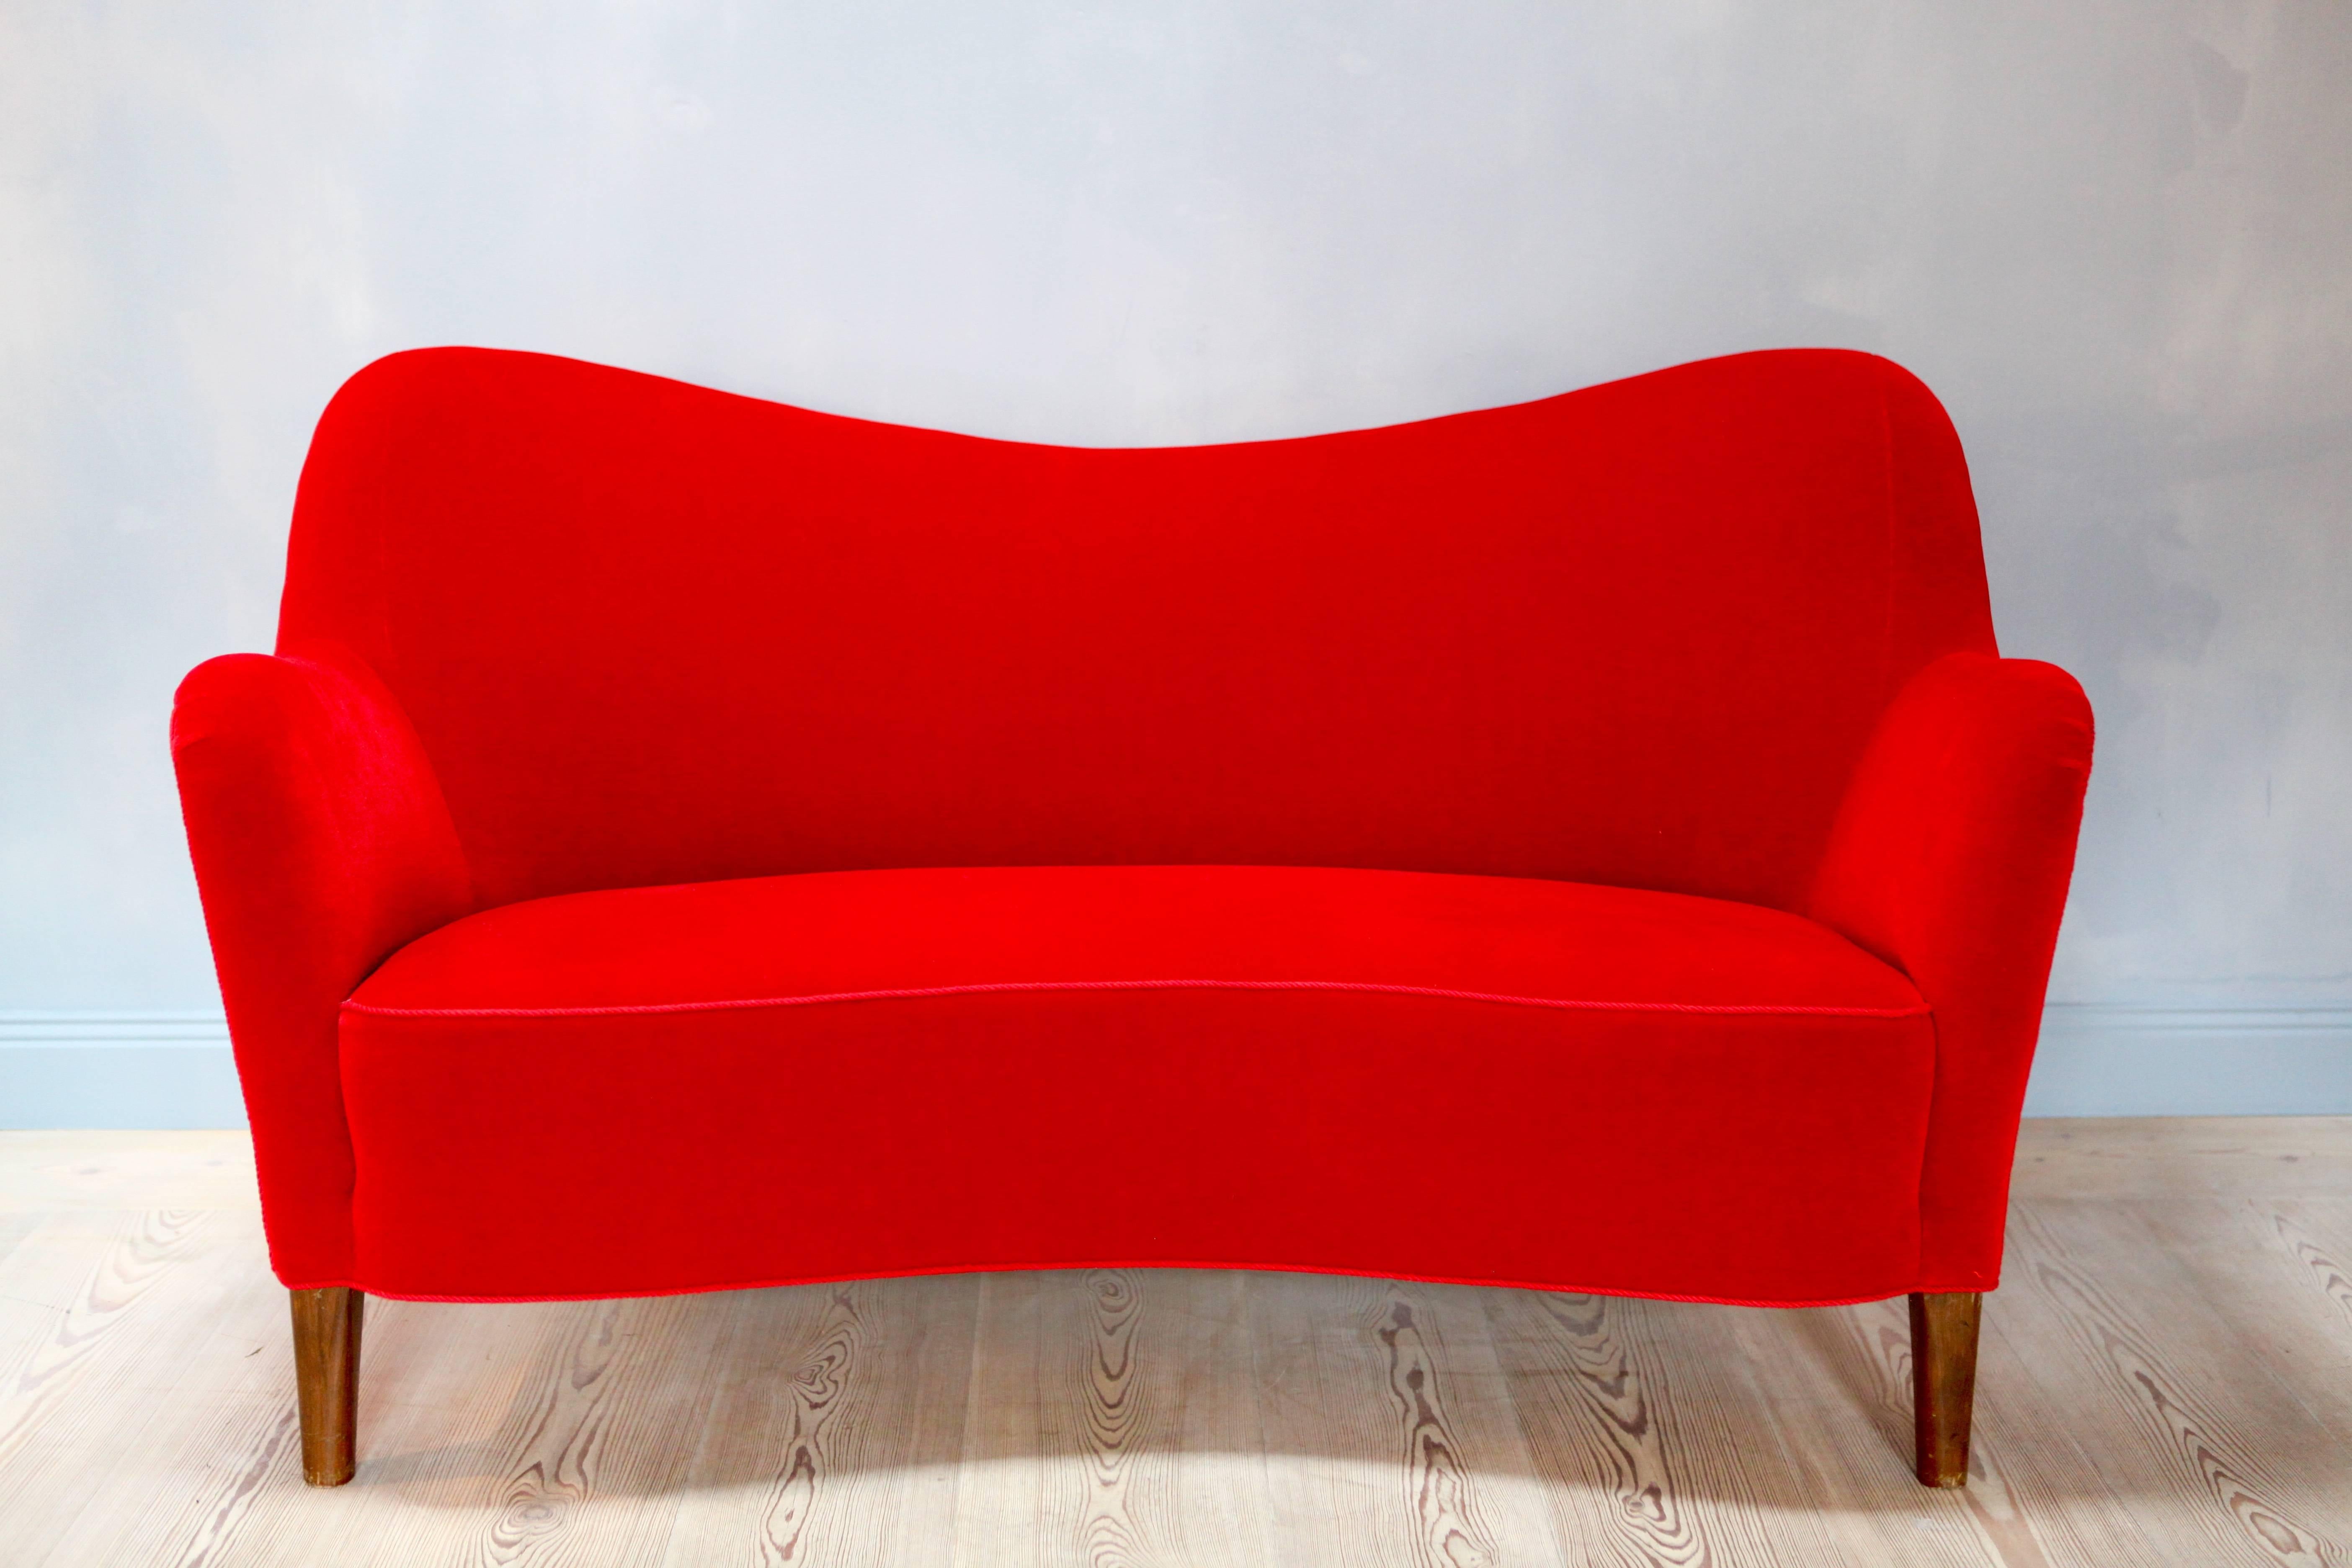 A elegant freestanding curved two-seat sofa by Nana Ditzel (1923-2005).
Patinated beech legs.
New upholstered in Raf Simons lipstick red mohair.